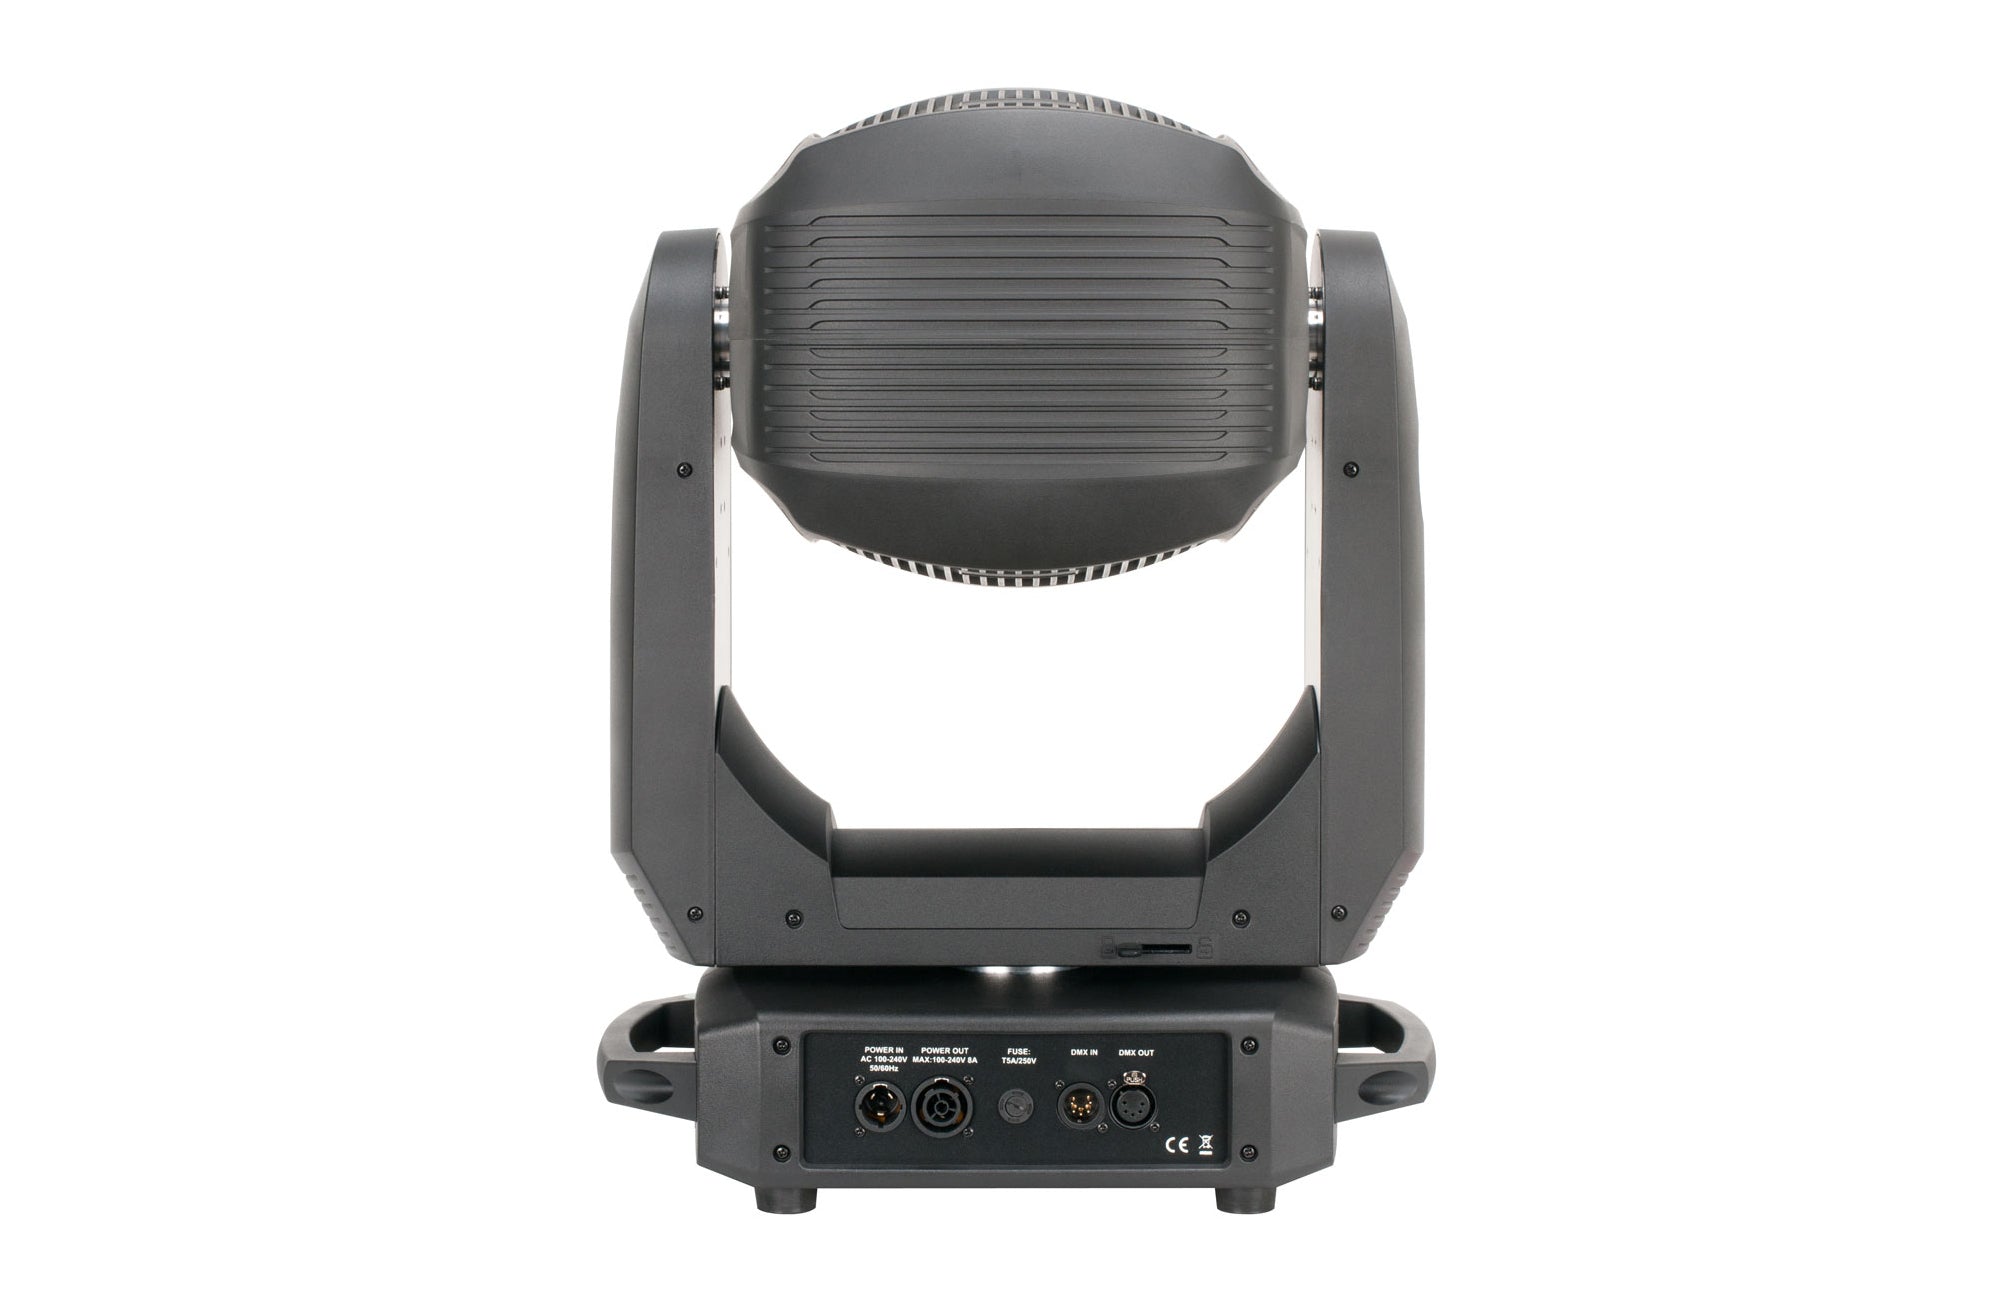 Elation FUZE PROFILE 305W RGBMA LED Moving Head Profile with Zoom and Framing Shutters